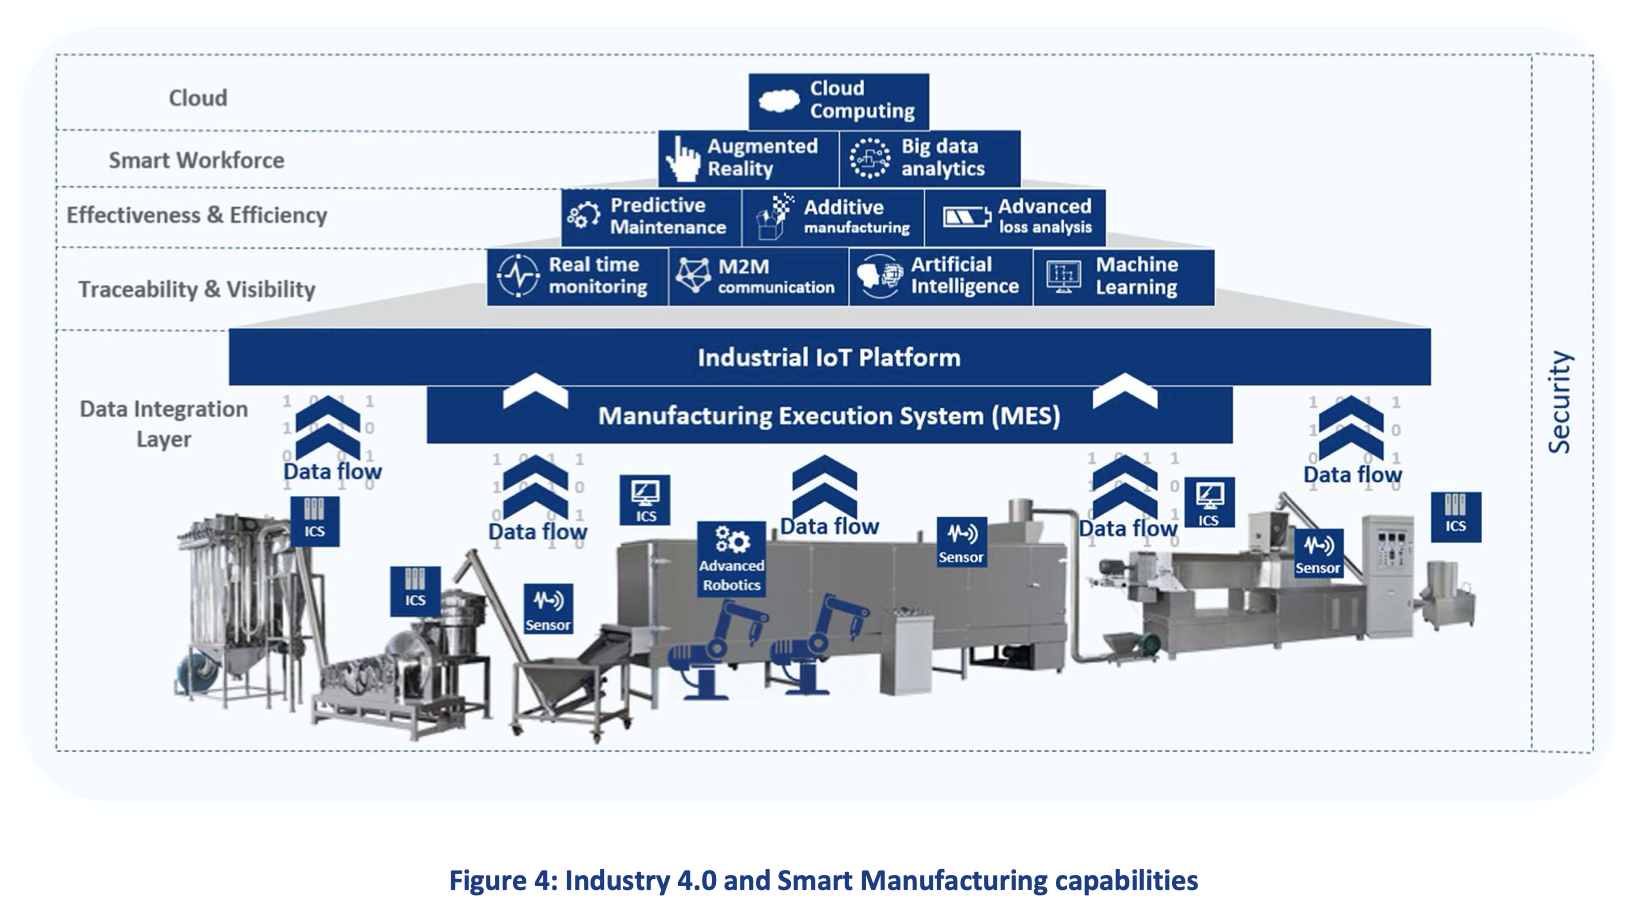 Industry 4.0 and Smart Manufacturing capabilities